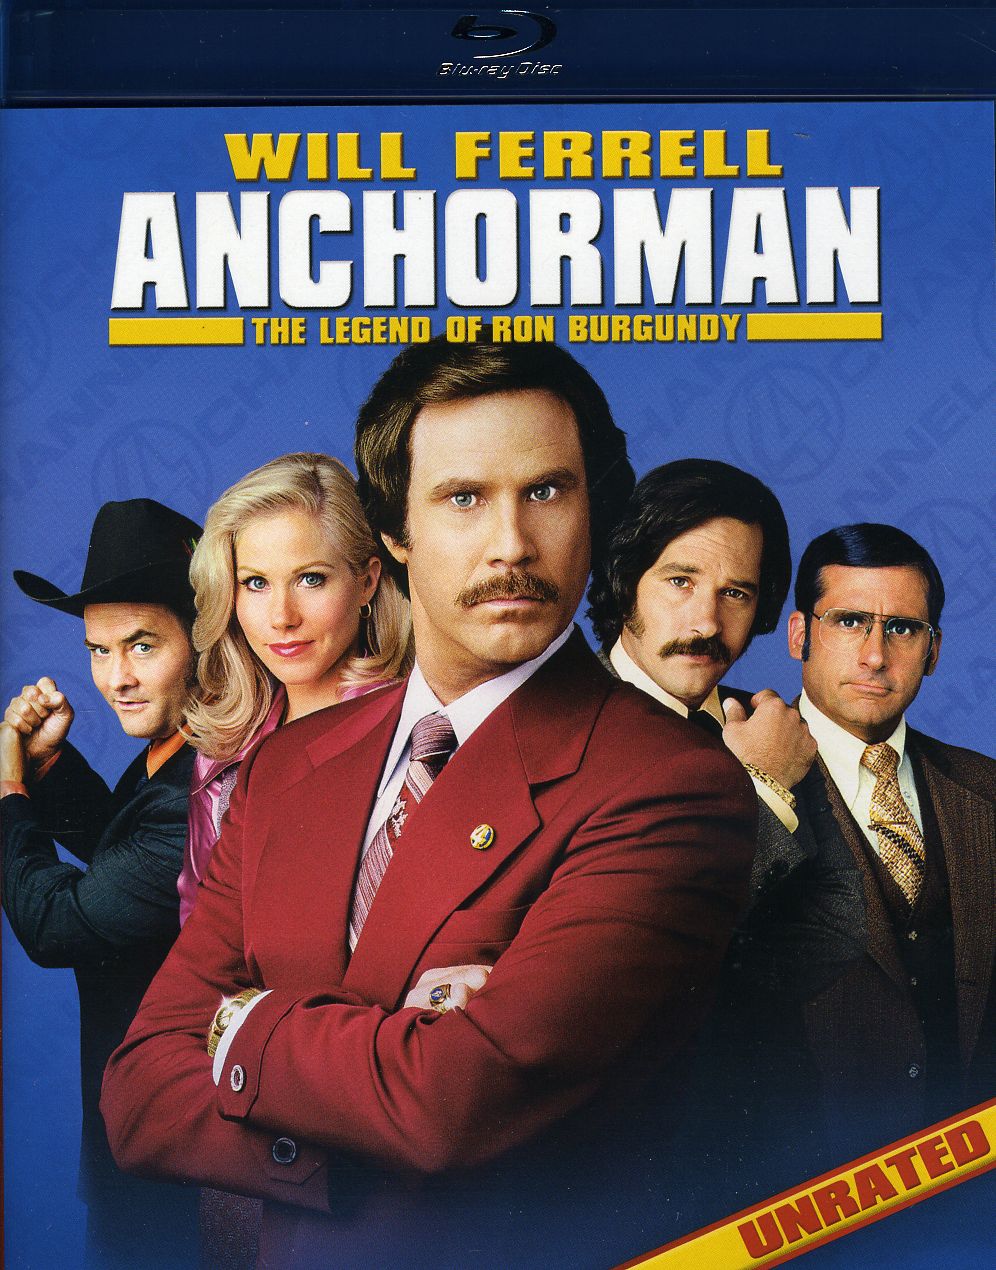 ANCHORMAN: THE LEGEND OF RON BURGUNDY (UNRATED)